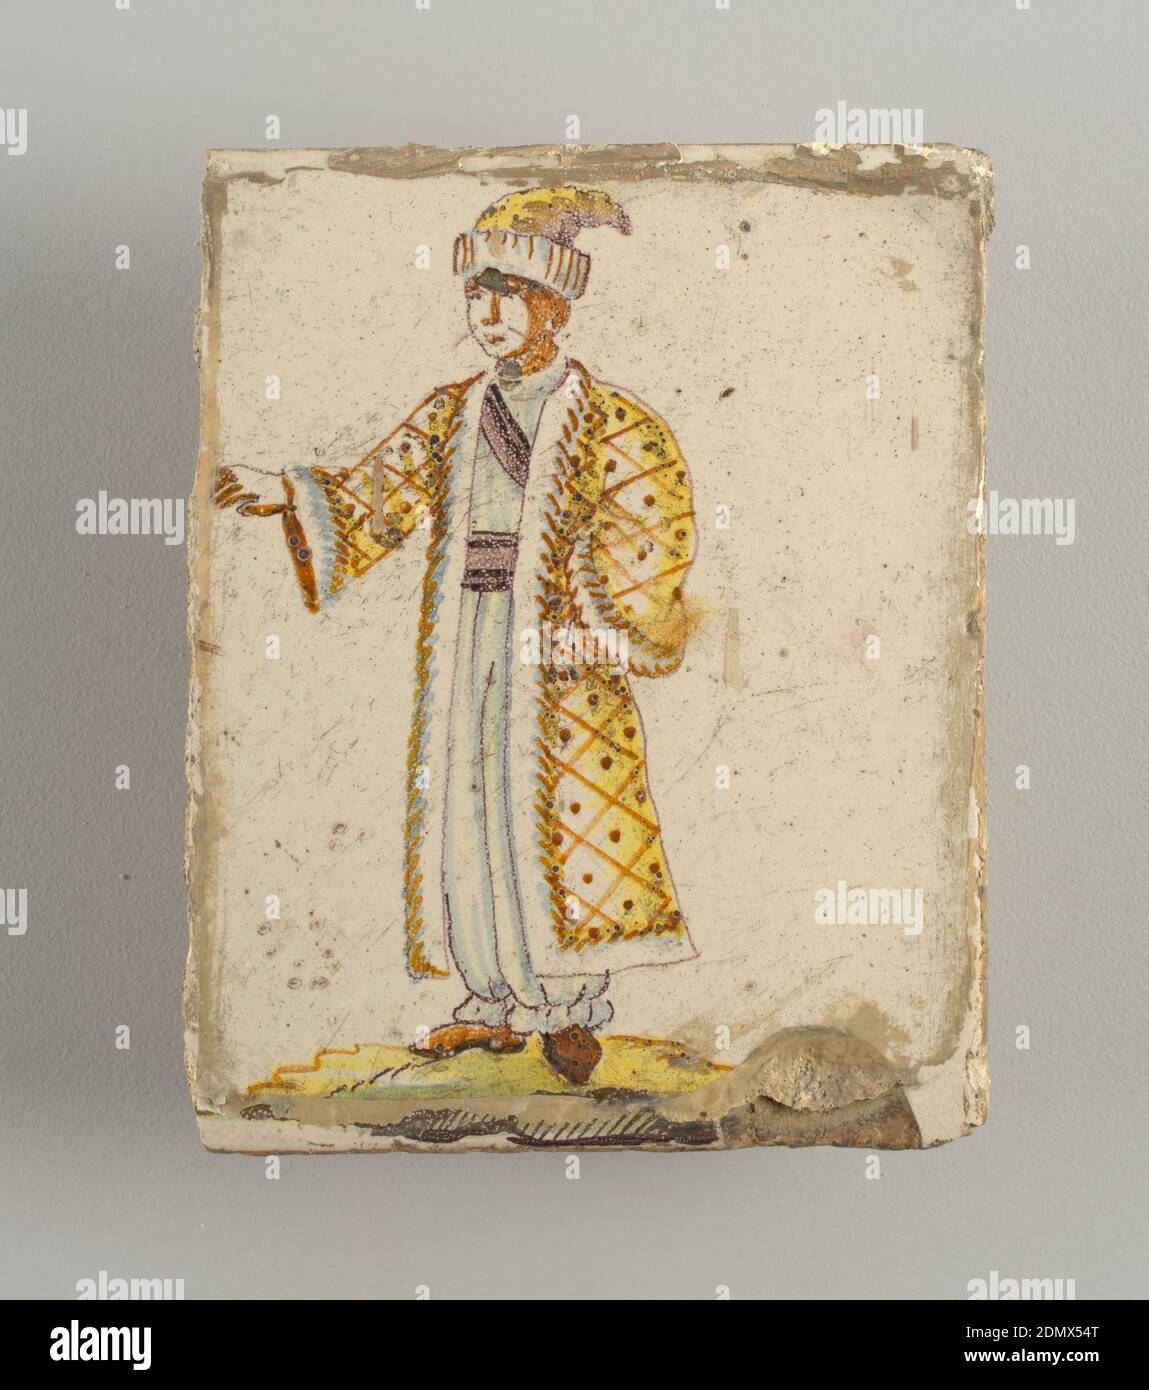 Tile, Earthenware, glazed and high fire decorated, Standing man, dressed in long white trousers, fur trimmed yellow coat and headdress; his right arm slightly raised. Chinoiserie type of decoration., Alcora, Spain, late 18th–early 19th century, tiles, Decorative Arts, Tile Stock Photo